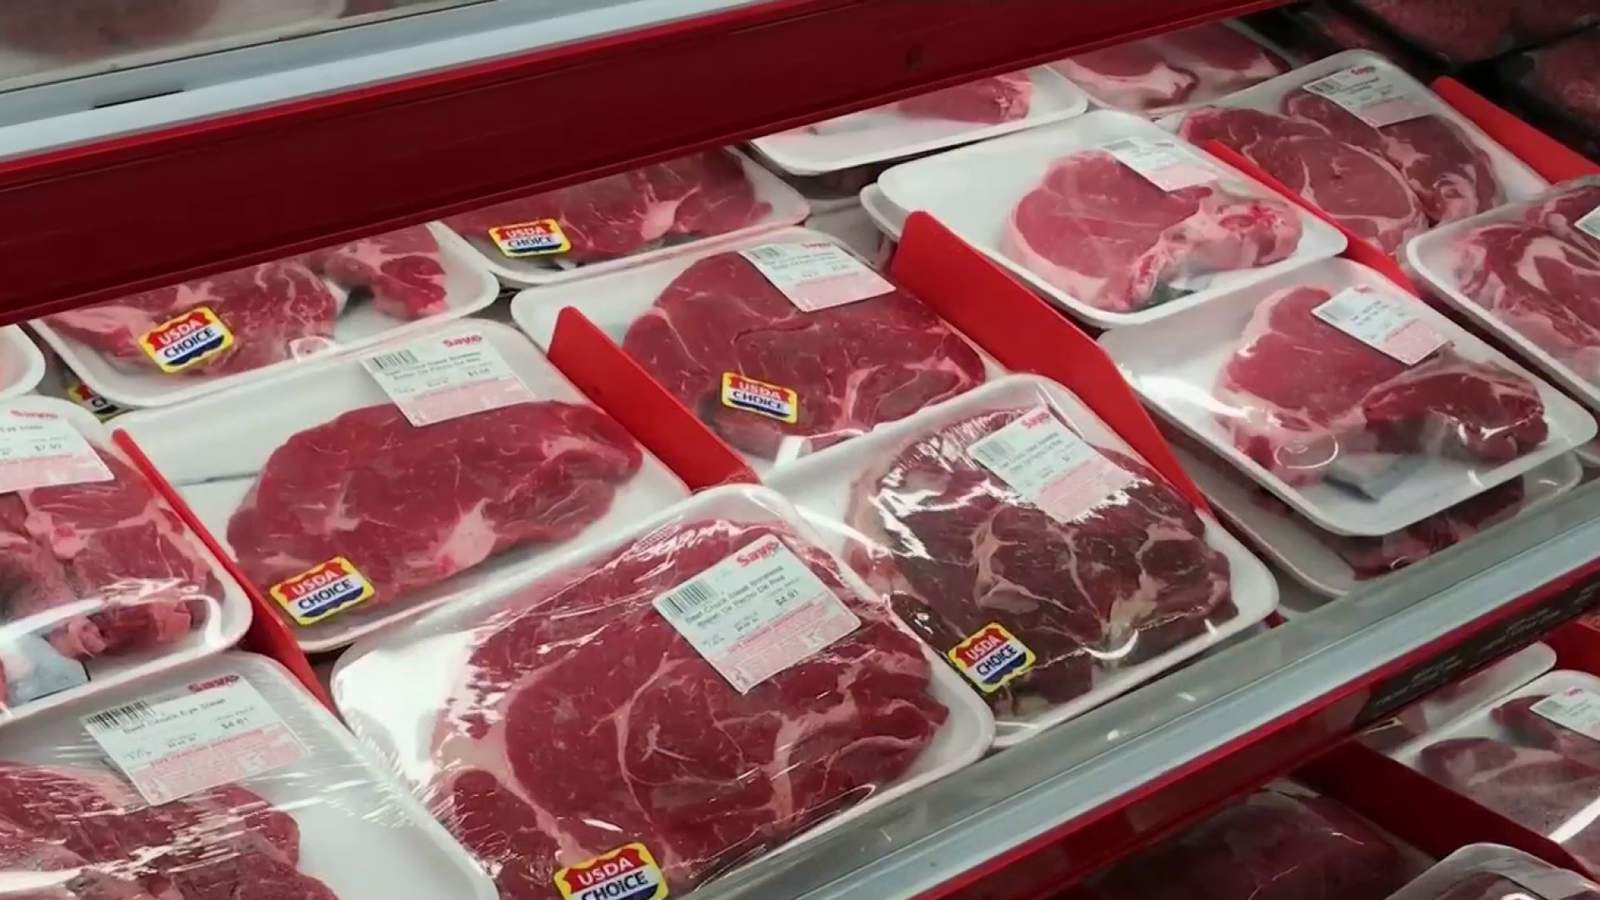  Reports: 60 workers at Michigan meat packing plant test positive for COVID-19 